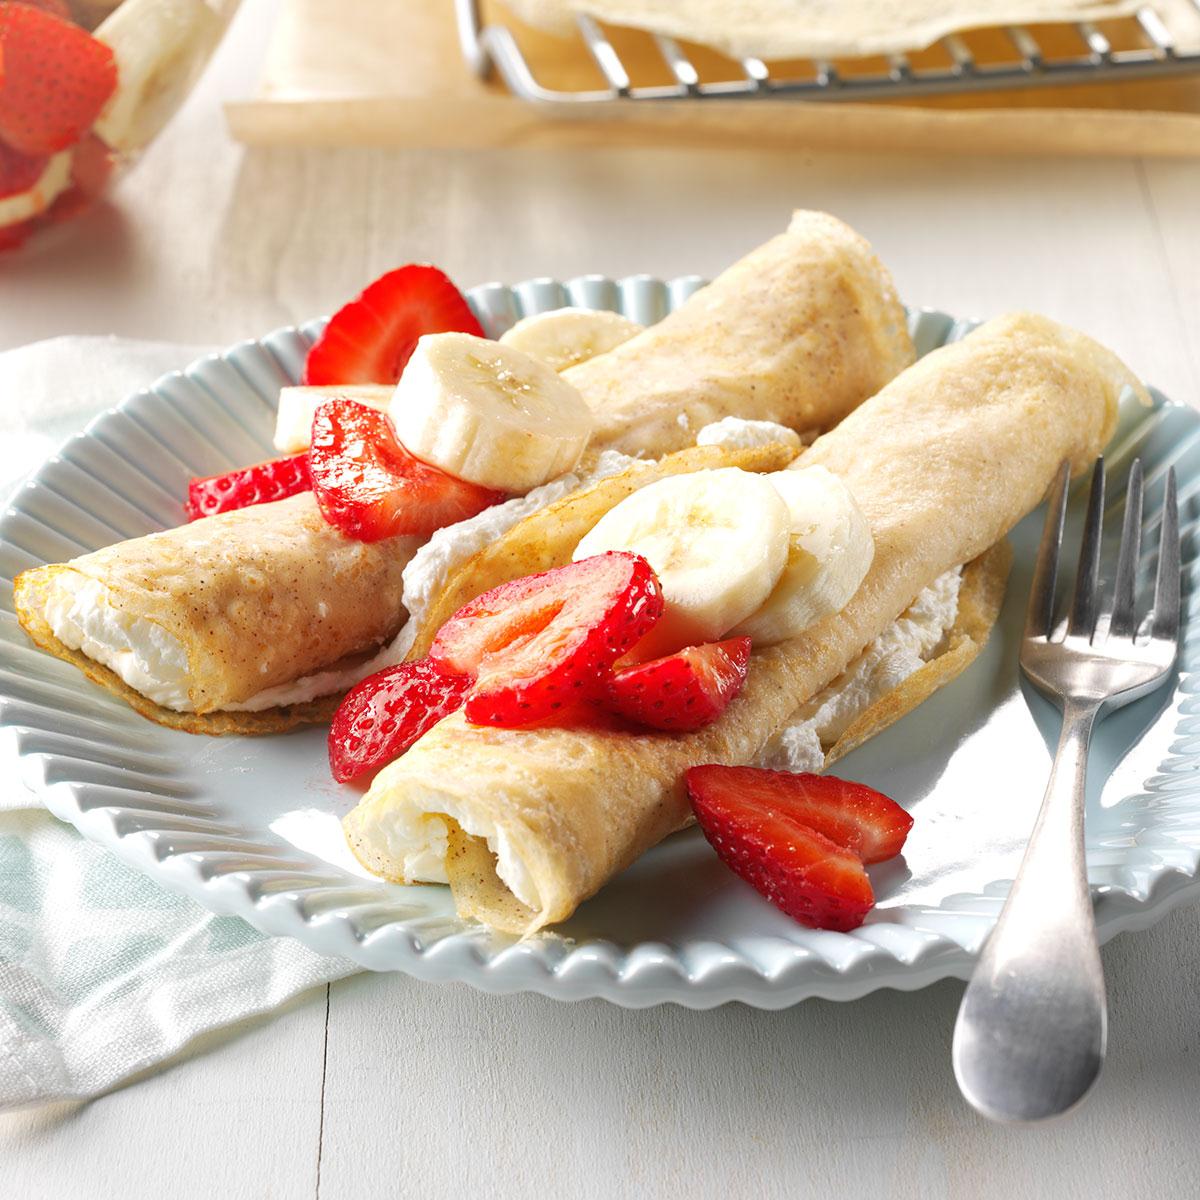 Strawberry Banana Crepes Recipe Taste Of Home,Are Owls Good Pets Reddit